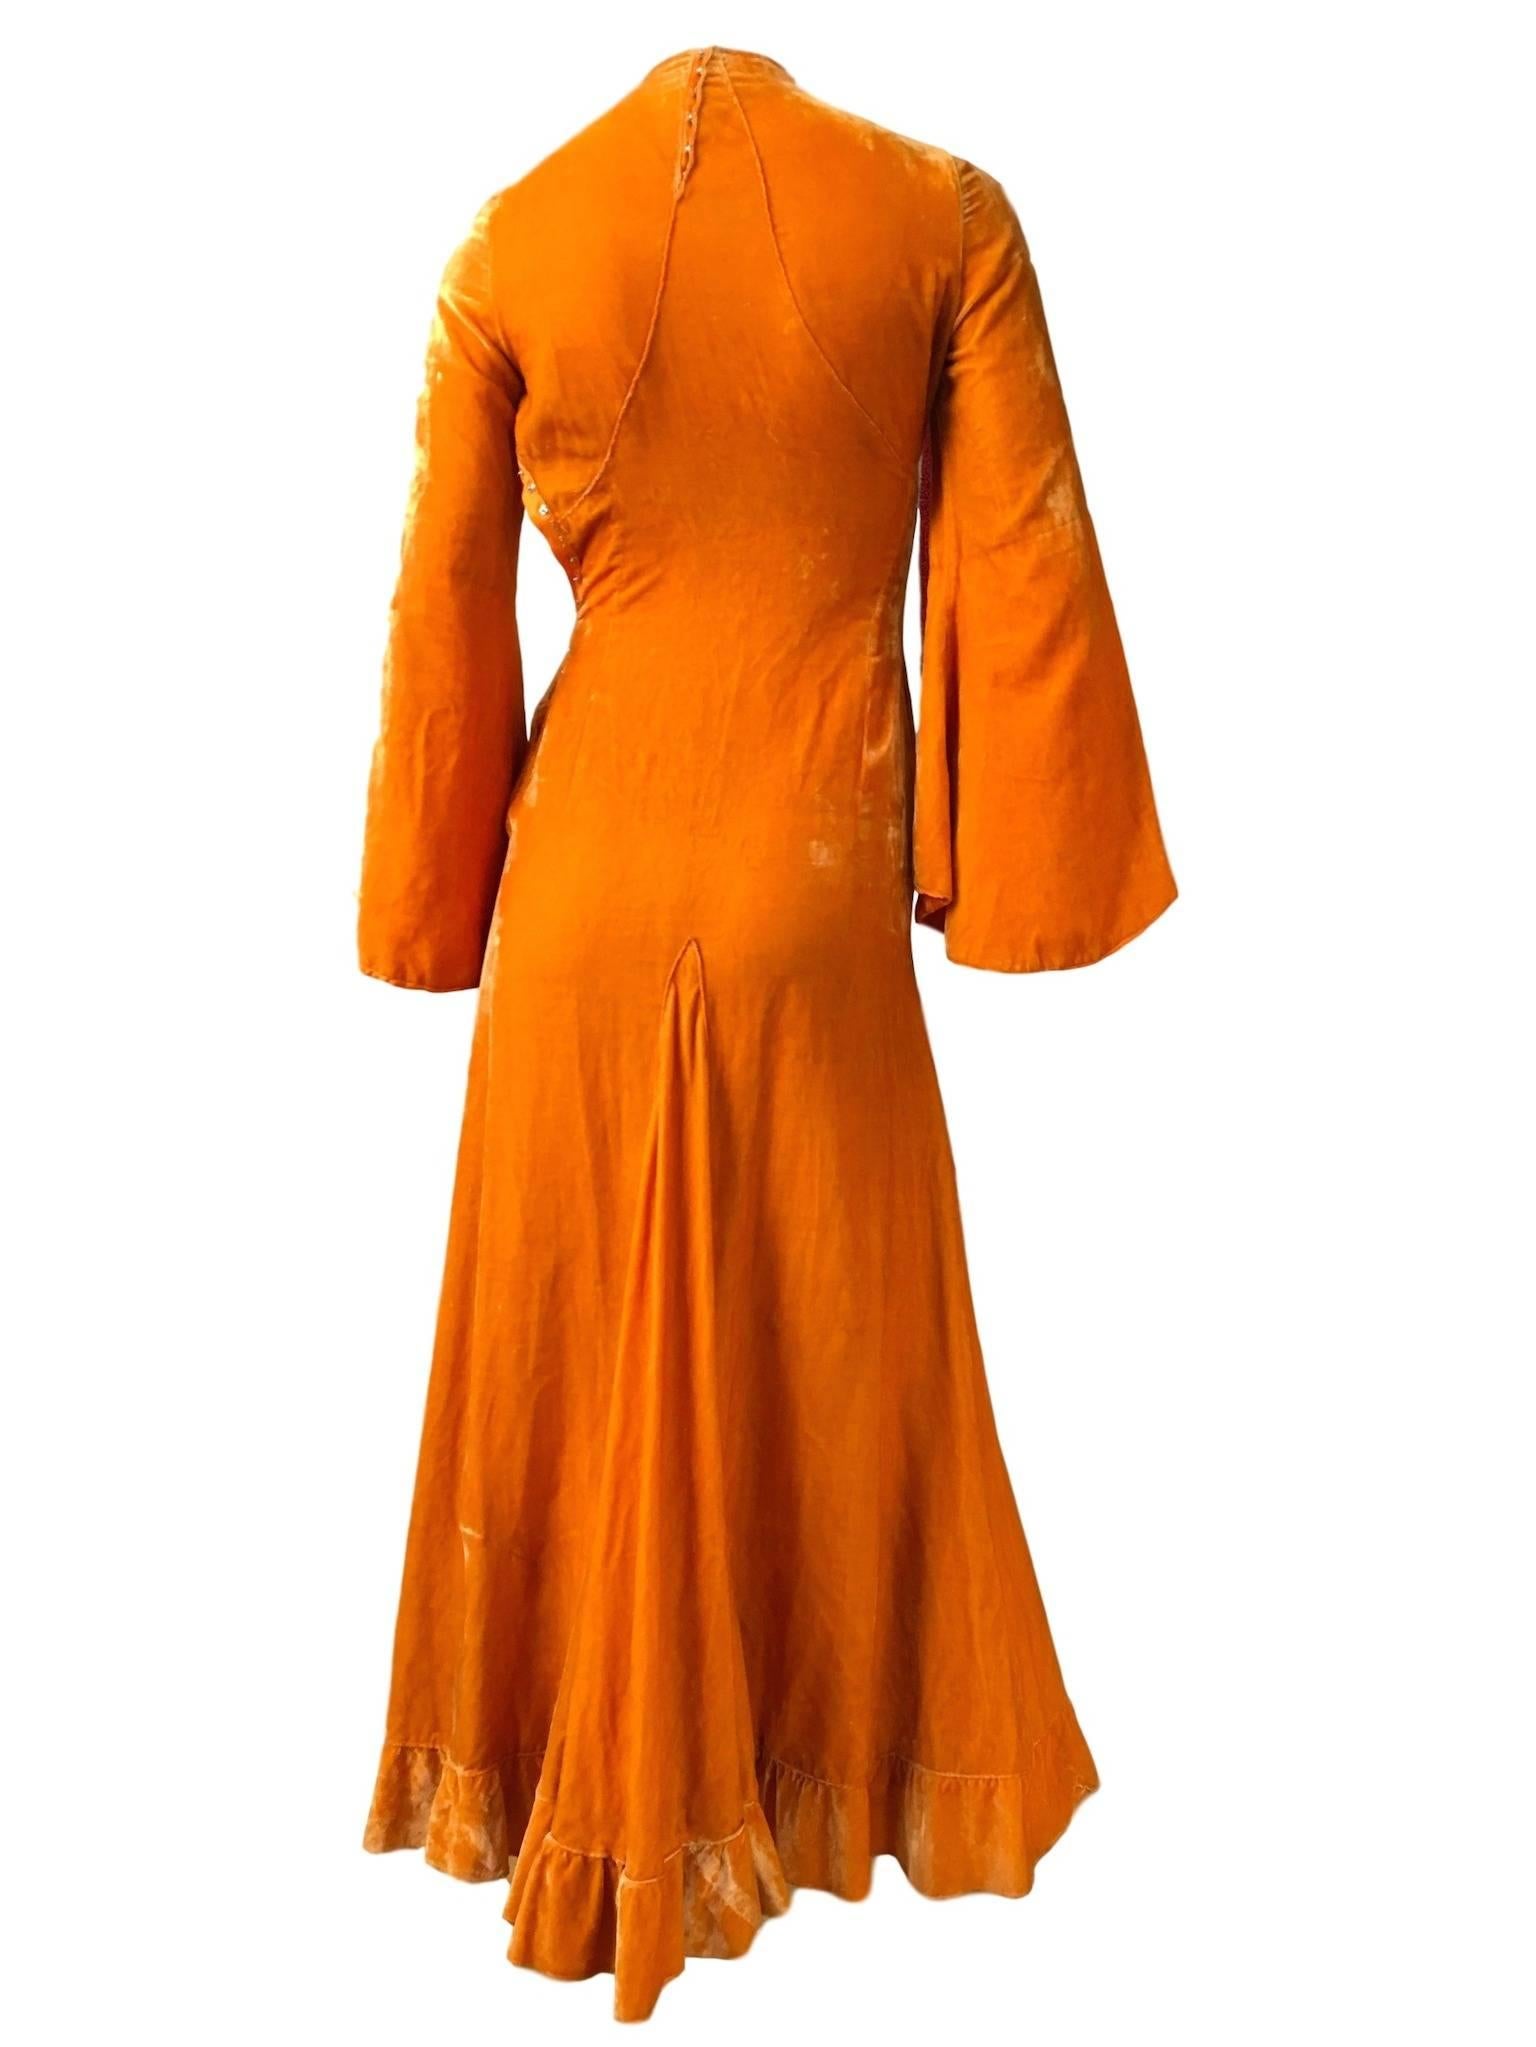 Art Deco era 1930s vintage orange silk velvet dress, with great bell sleeves, has popper fastening with hook/eyes to finish both on side of dress and back neck area.

Size UK 6 measures 15 inches under arm to under arm, 12 inches across waist and